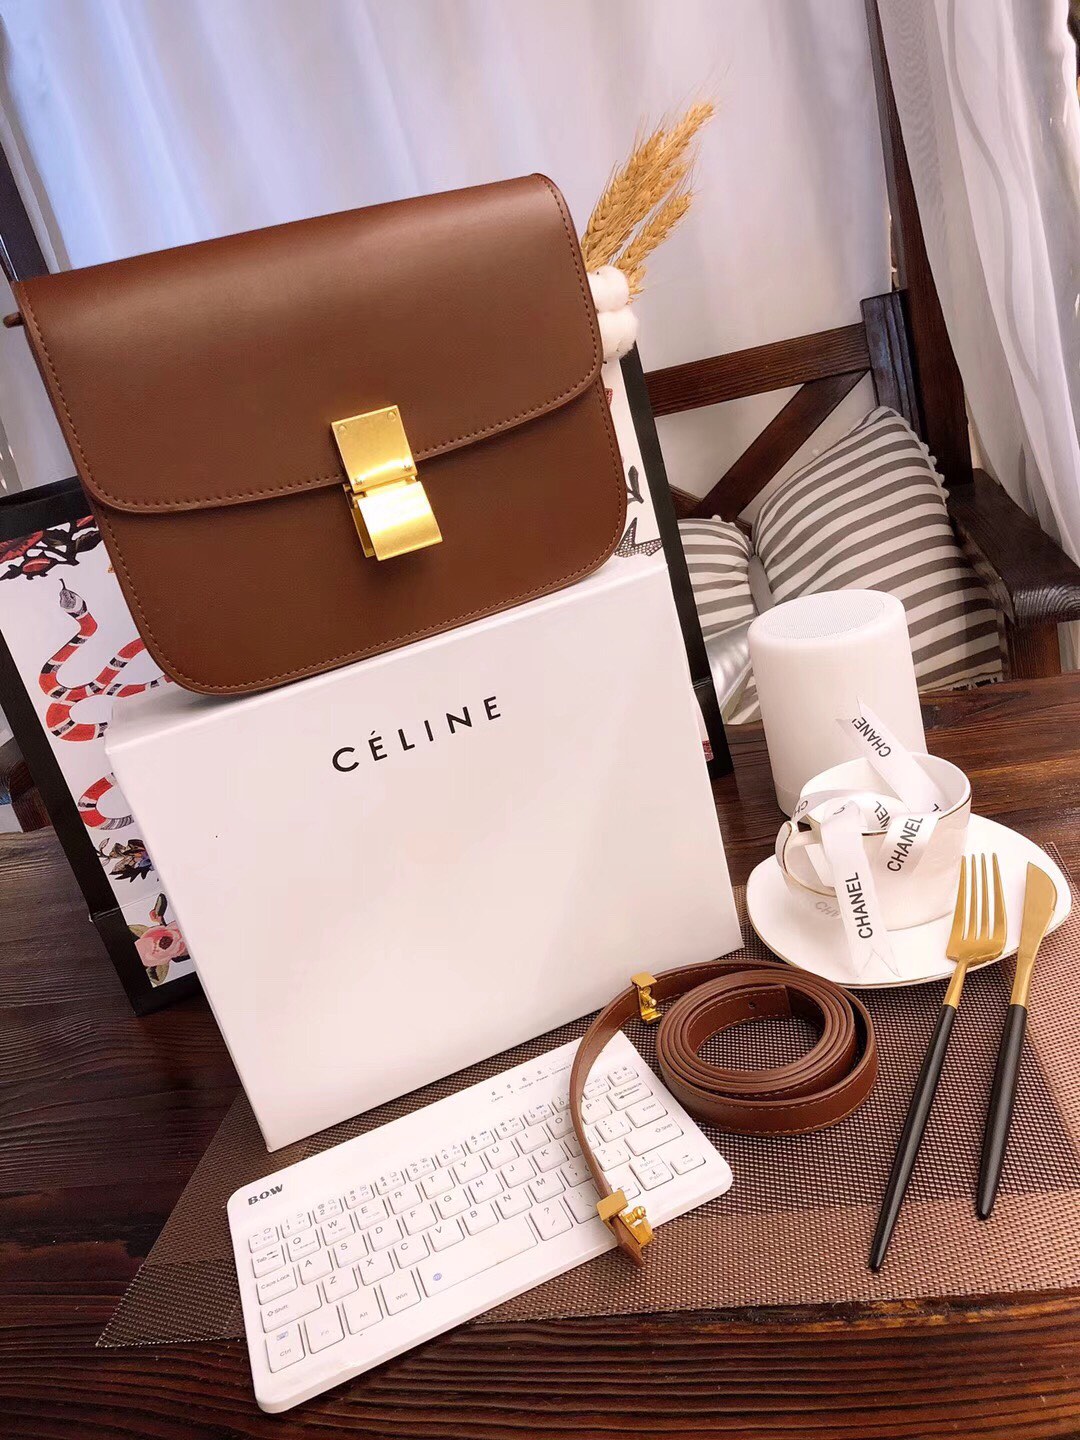 YUPOO-China Wholesale Supplier Branded Luxury celine_bags, join us on whatsapp | Yupoo